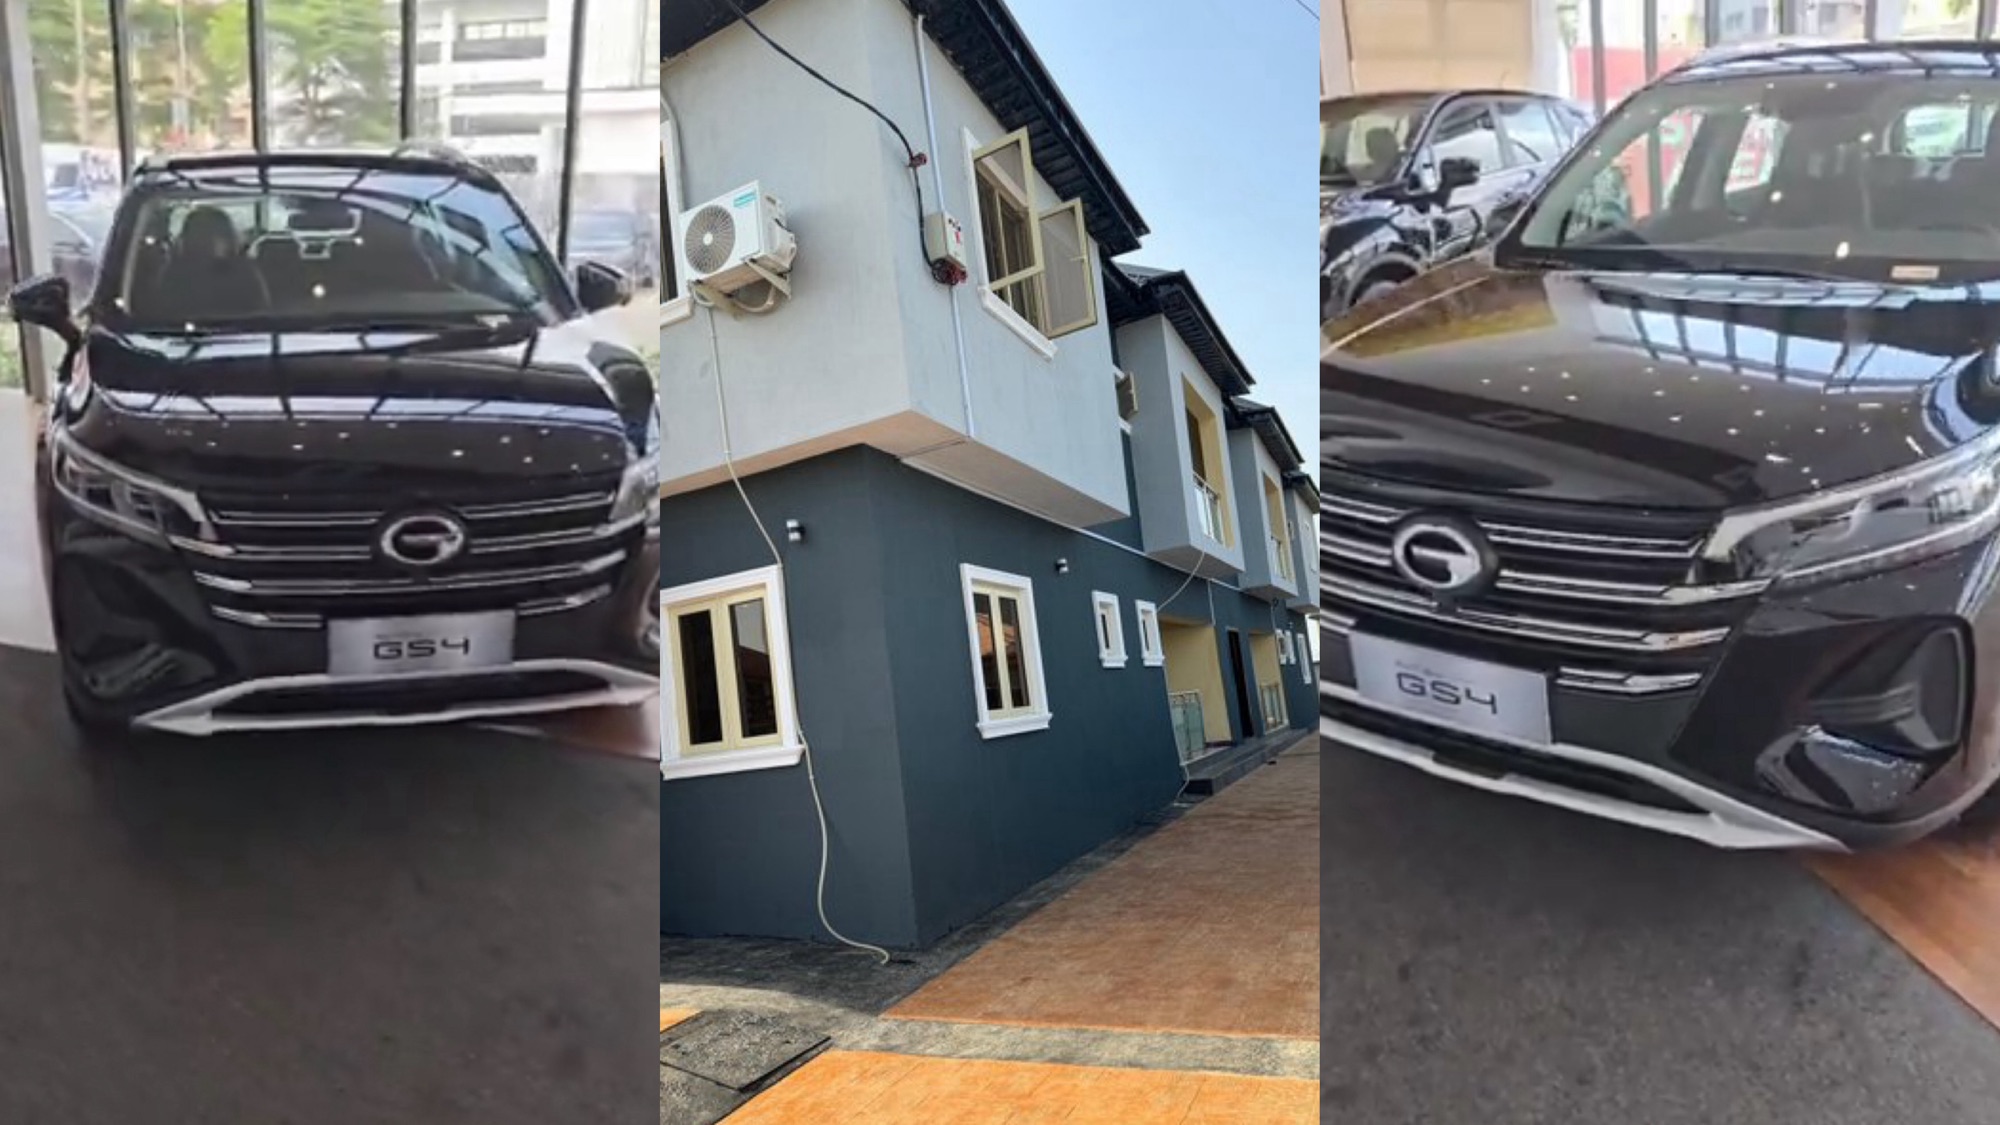 Man builds house, buys new car for his mother who sacrificed everything to raise him and his 4 siblings in a single room